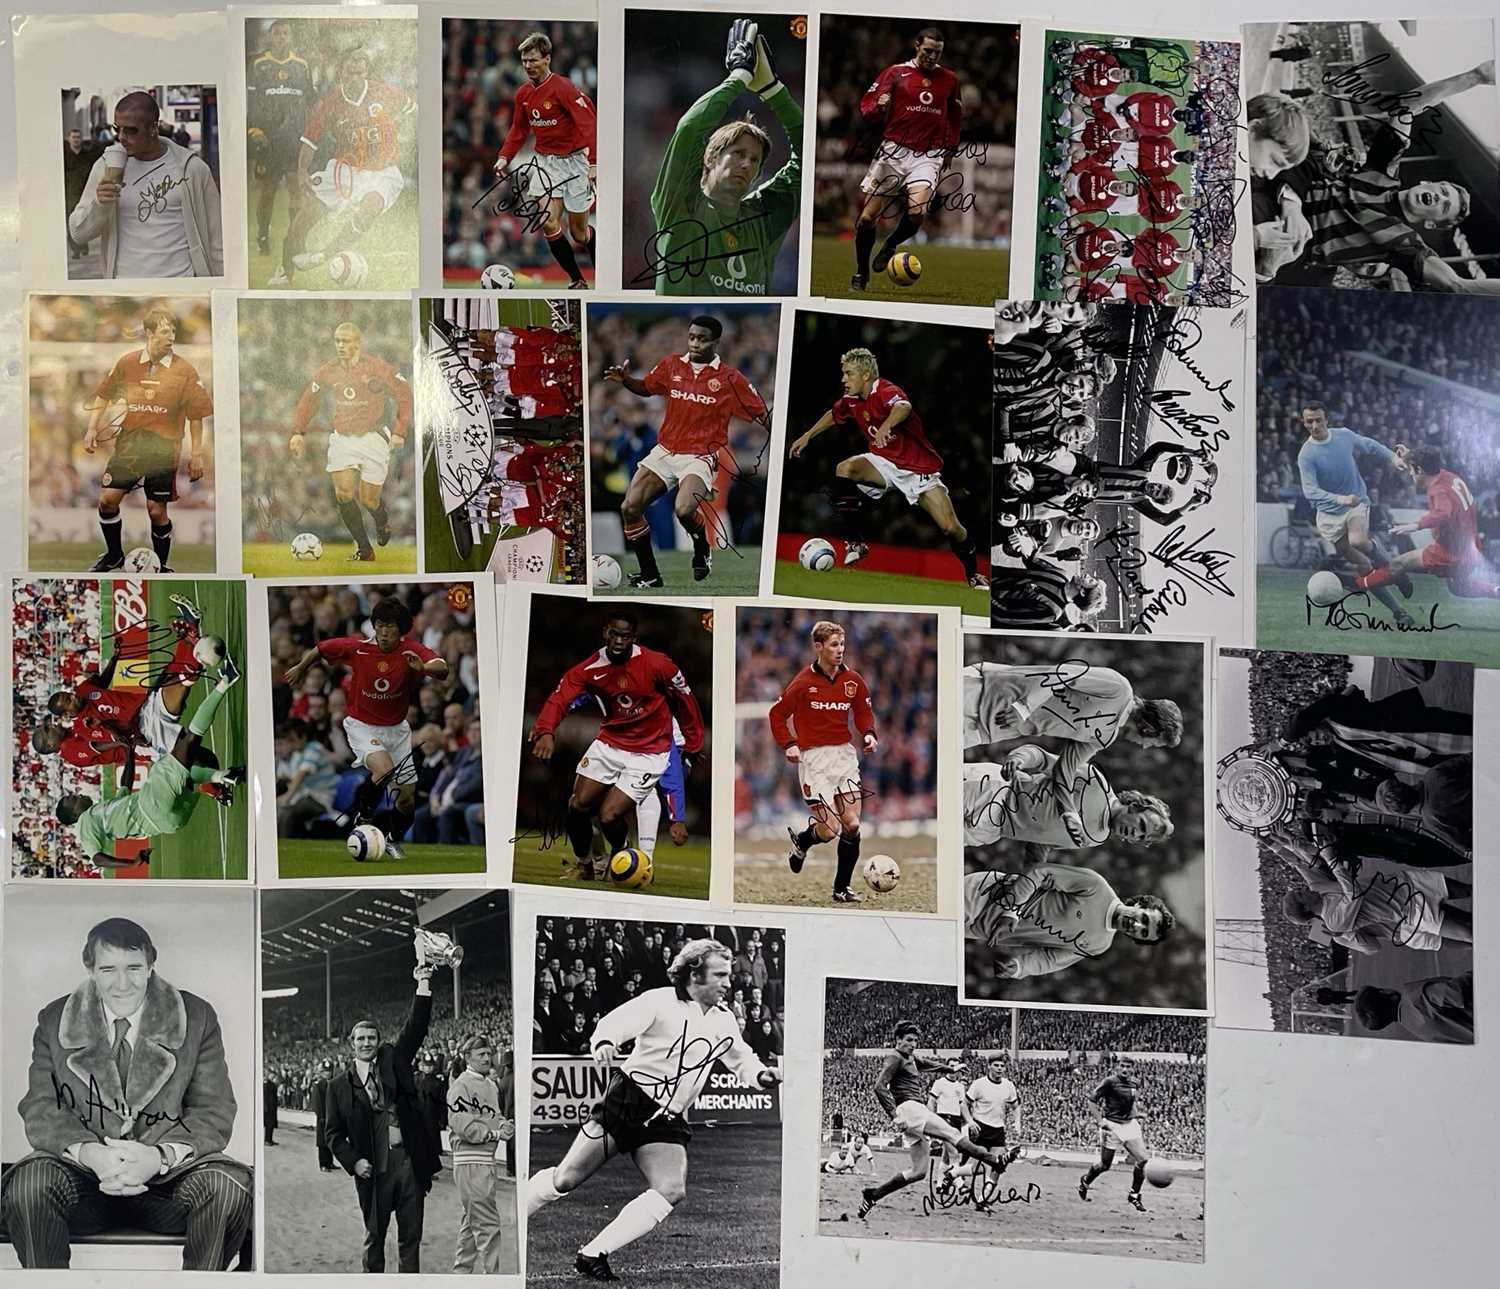 MANCHESTER UNITED / MANCHESTER CITY - SIGNED FOOTBALL PHOTOGRAPHS.